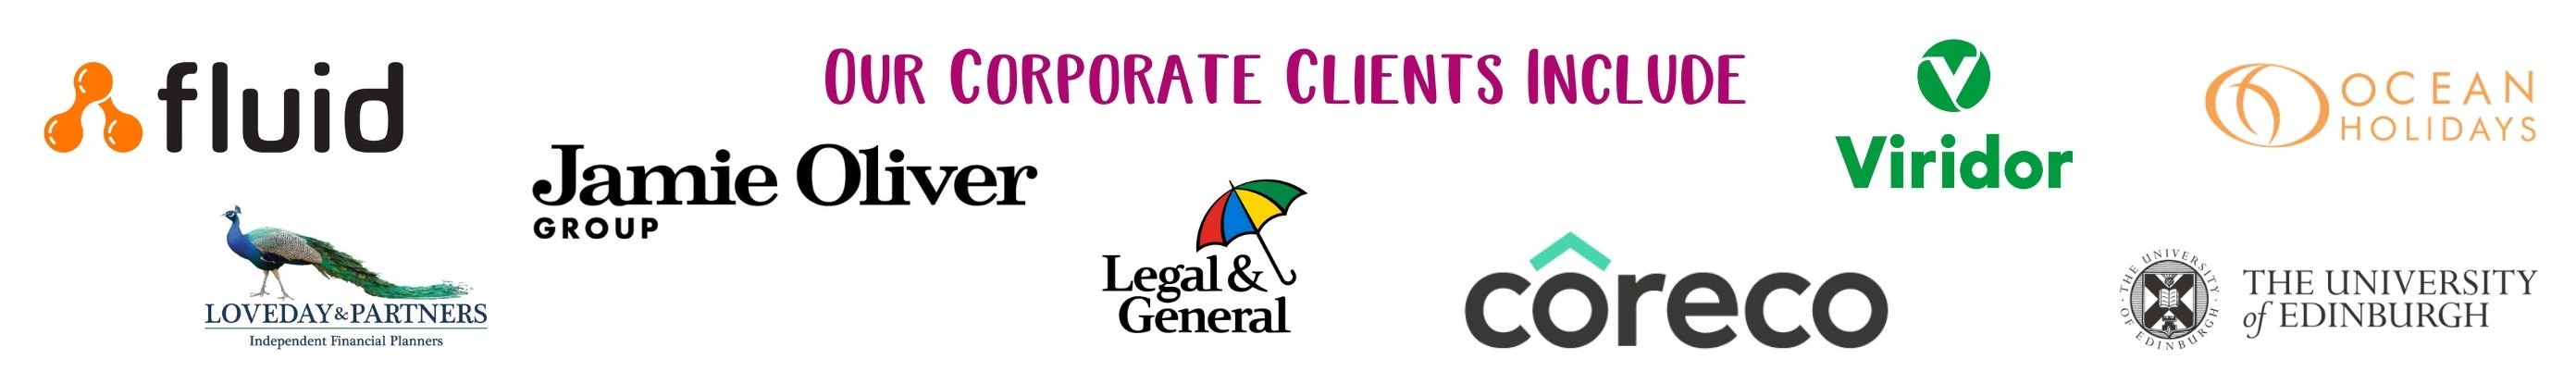 Our corporate clients include